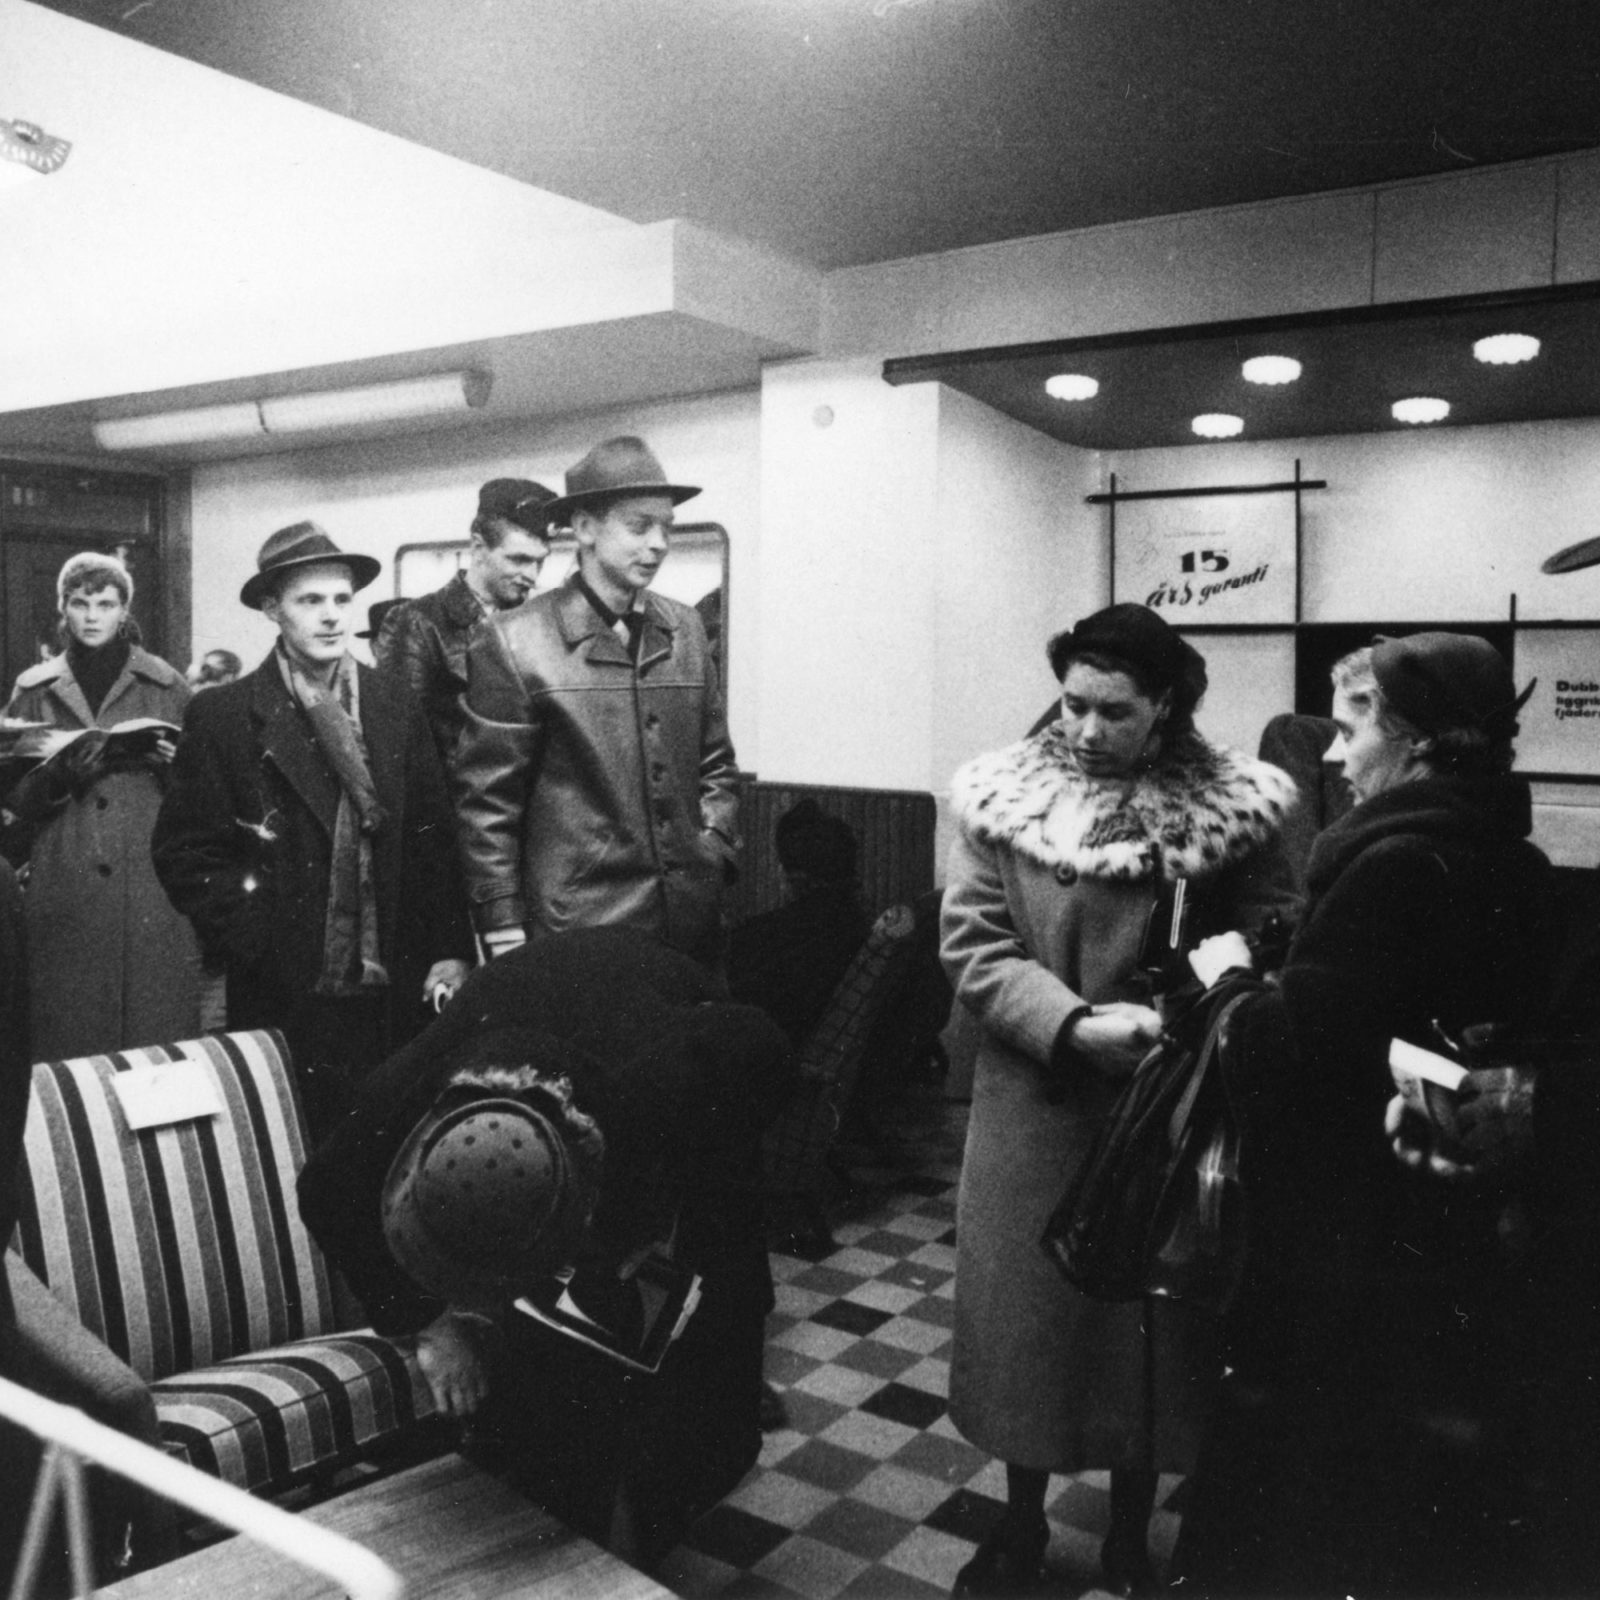 Visitors crammed in at a 1950s IKEA furniture show, looking at posters and stuffed armchairs.